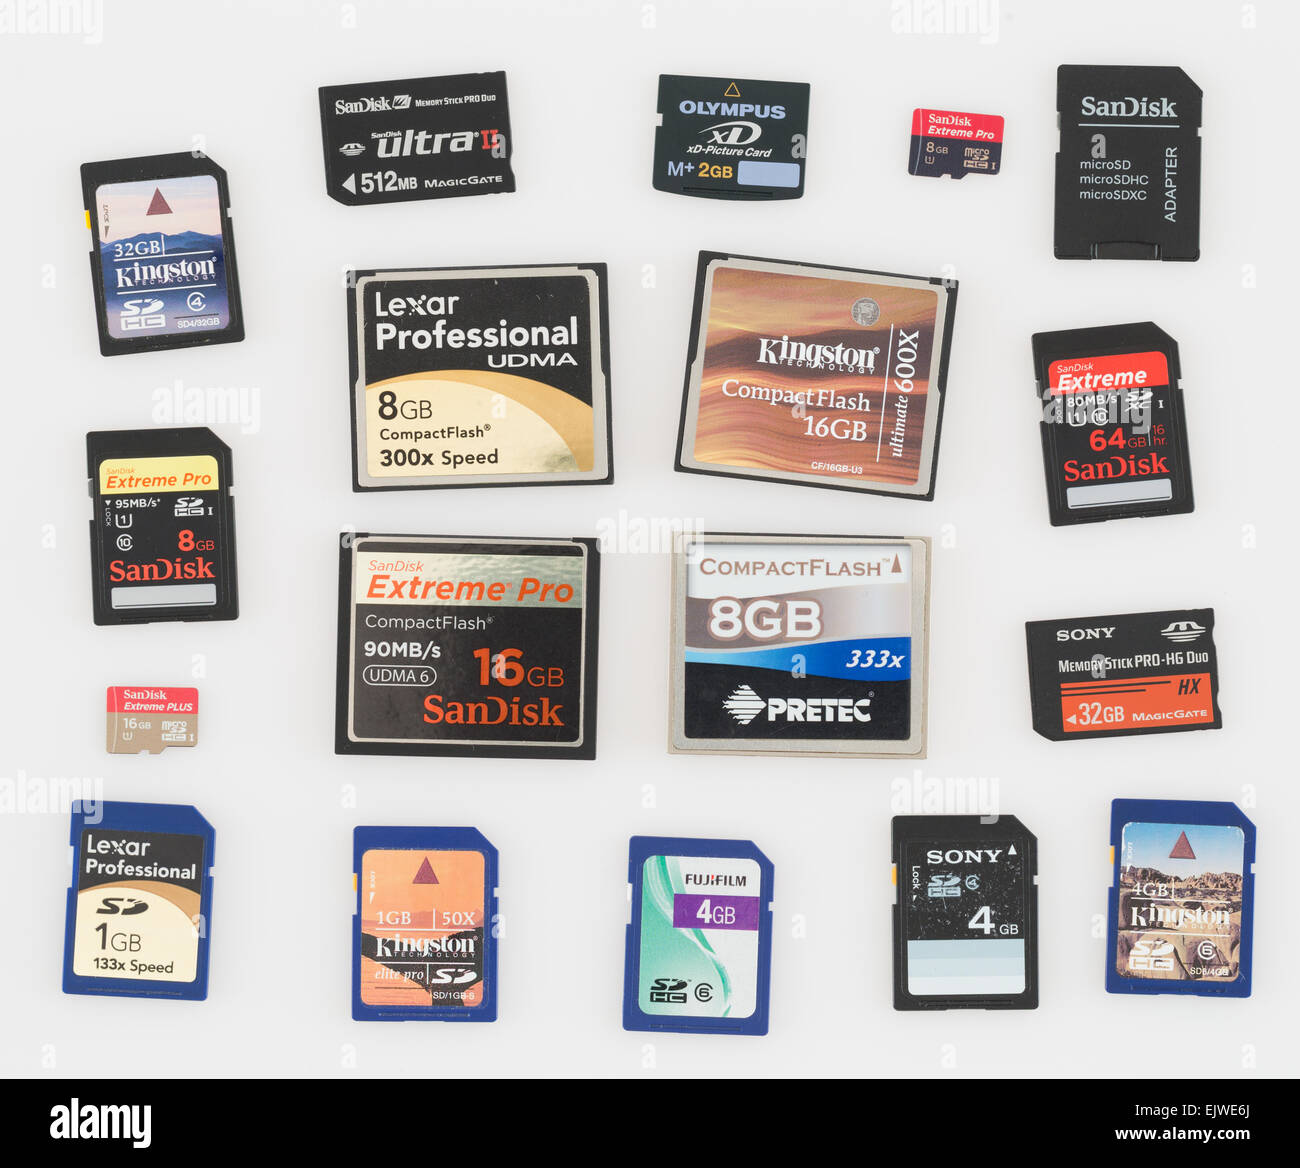 Memory card reader in use with a Sandisk Compact Flash card Stock Photo -  Alamy